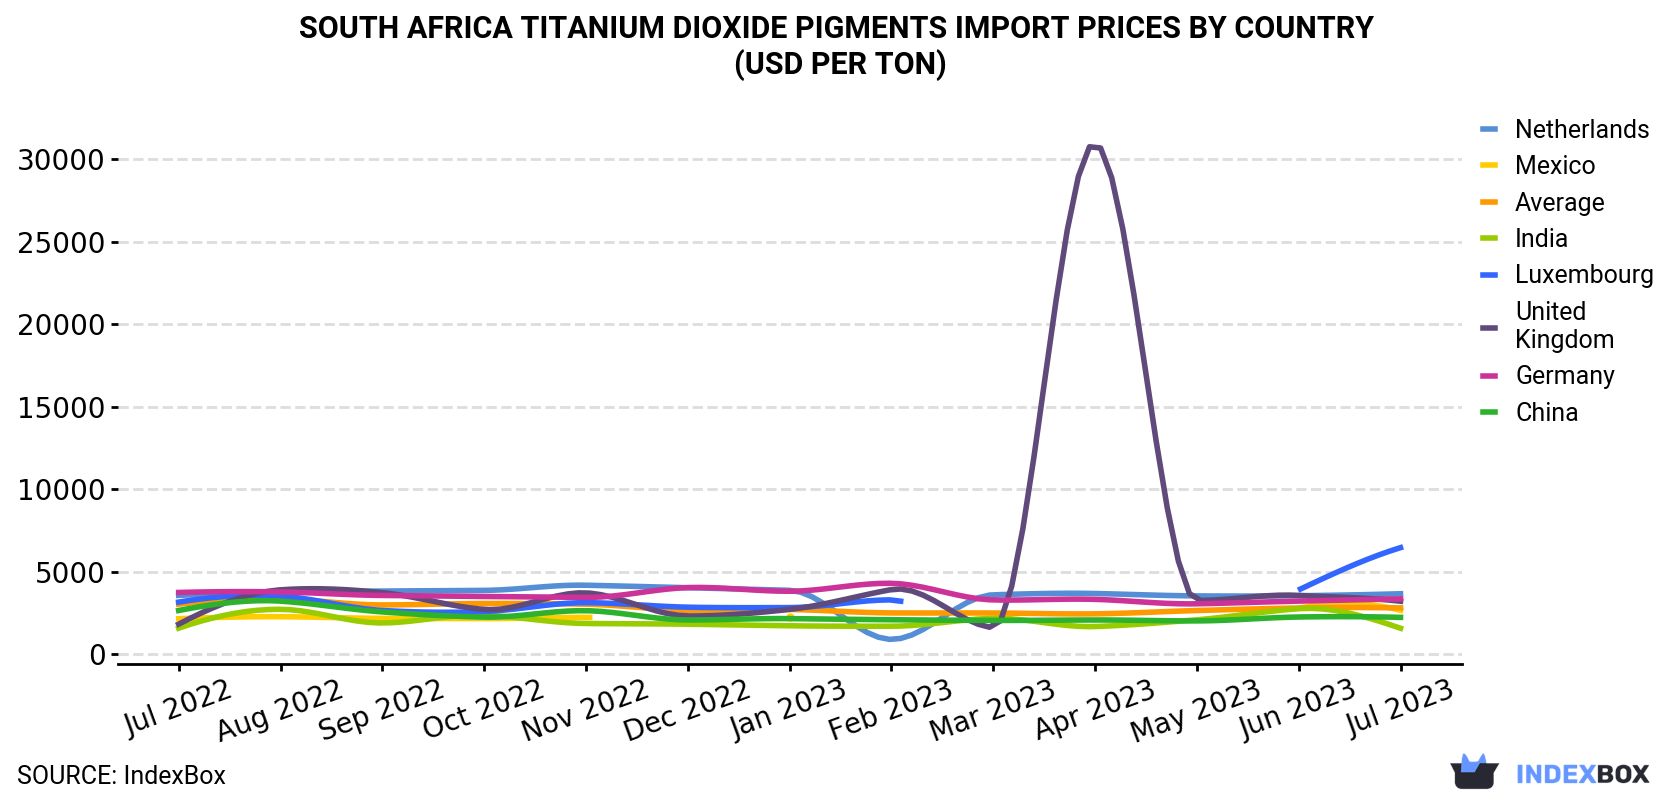 South Africa Titanium Dioxide Pigments Import Prices By Country (USD Per Ton)